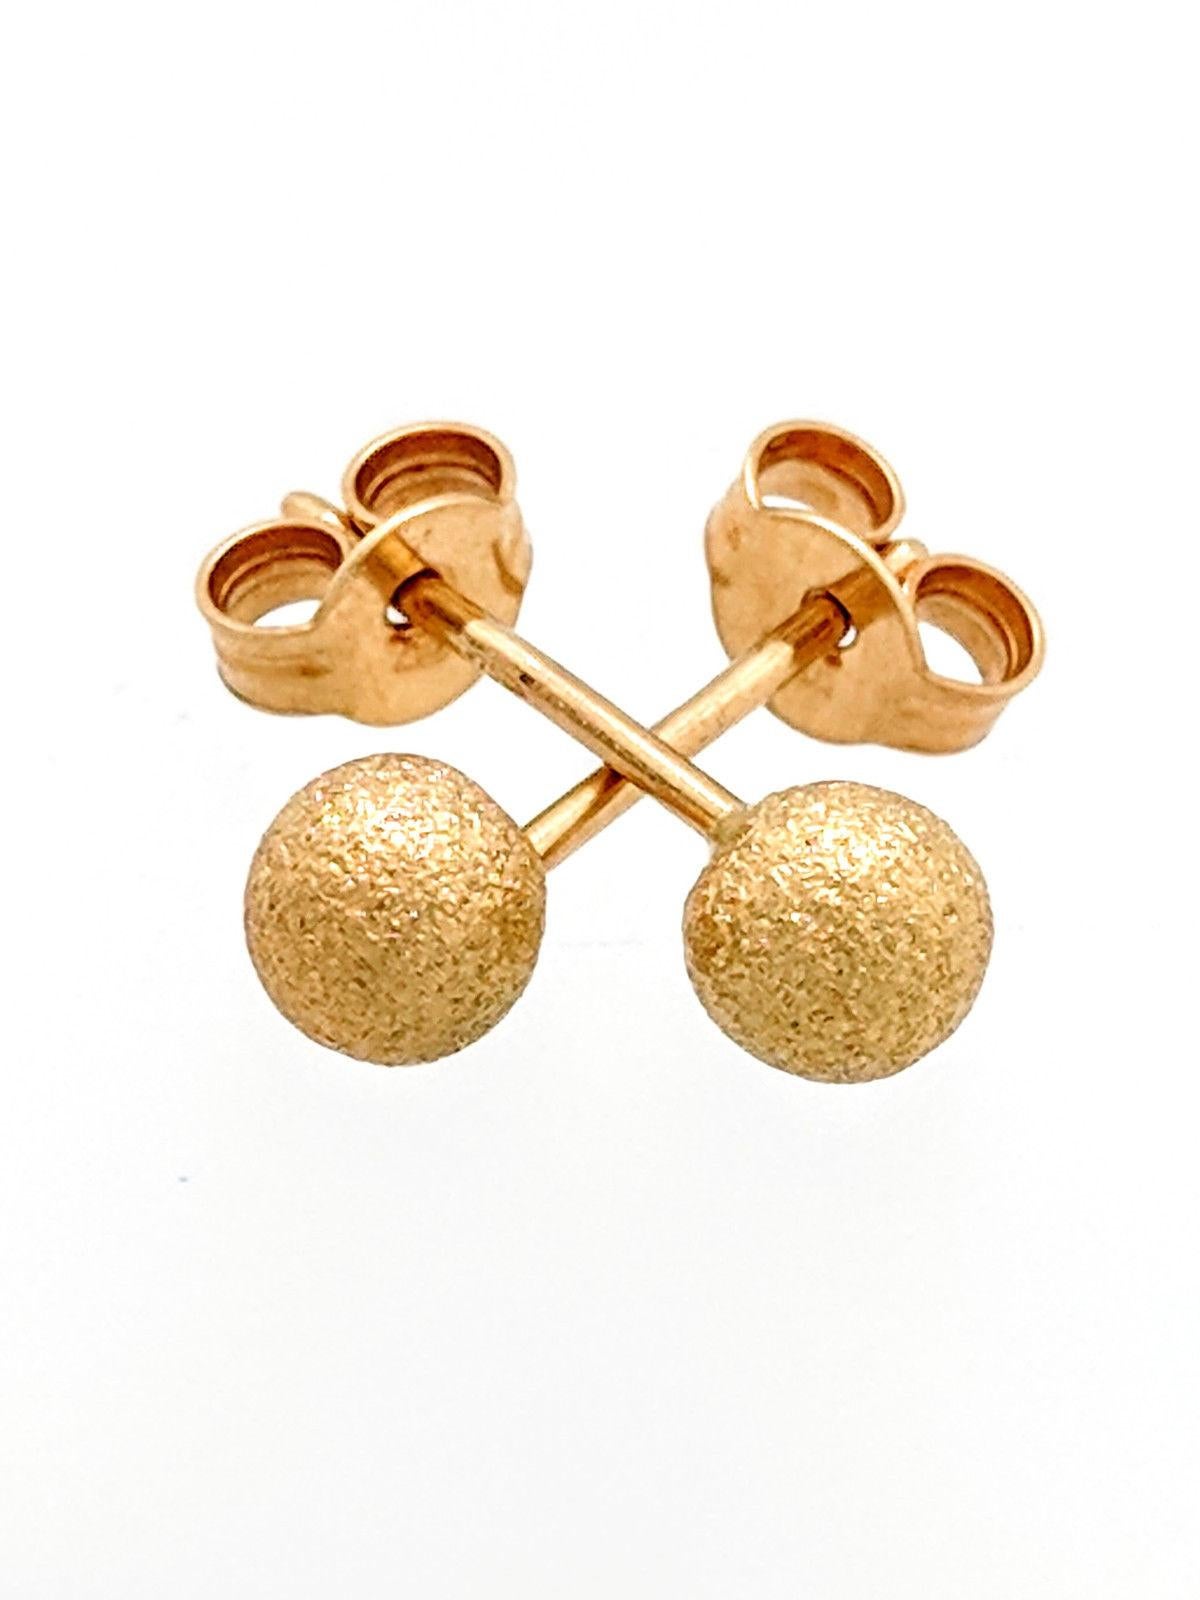 Contemporary 18 Karat Yellow Gold Shimmery Gold Ball Stud Earrings